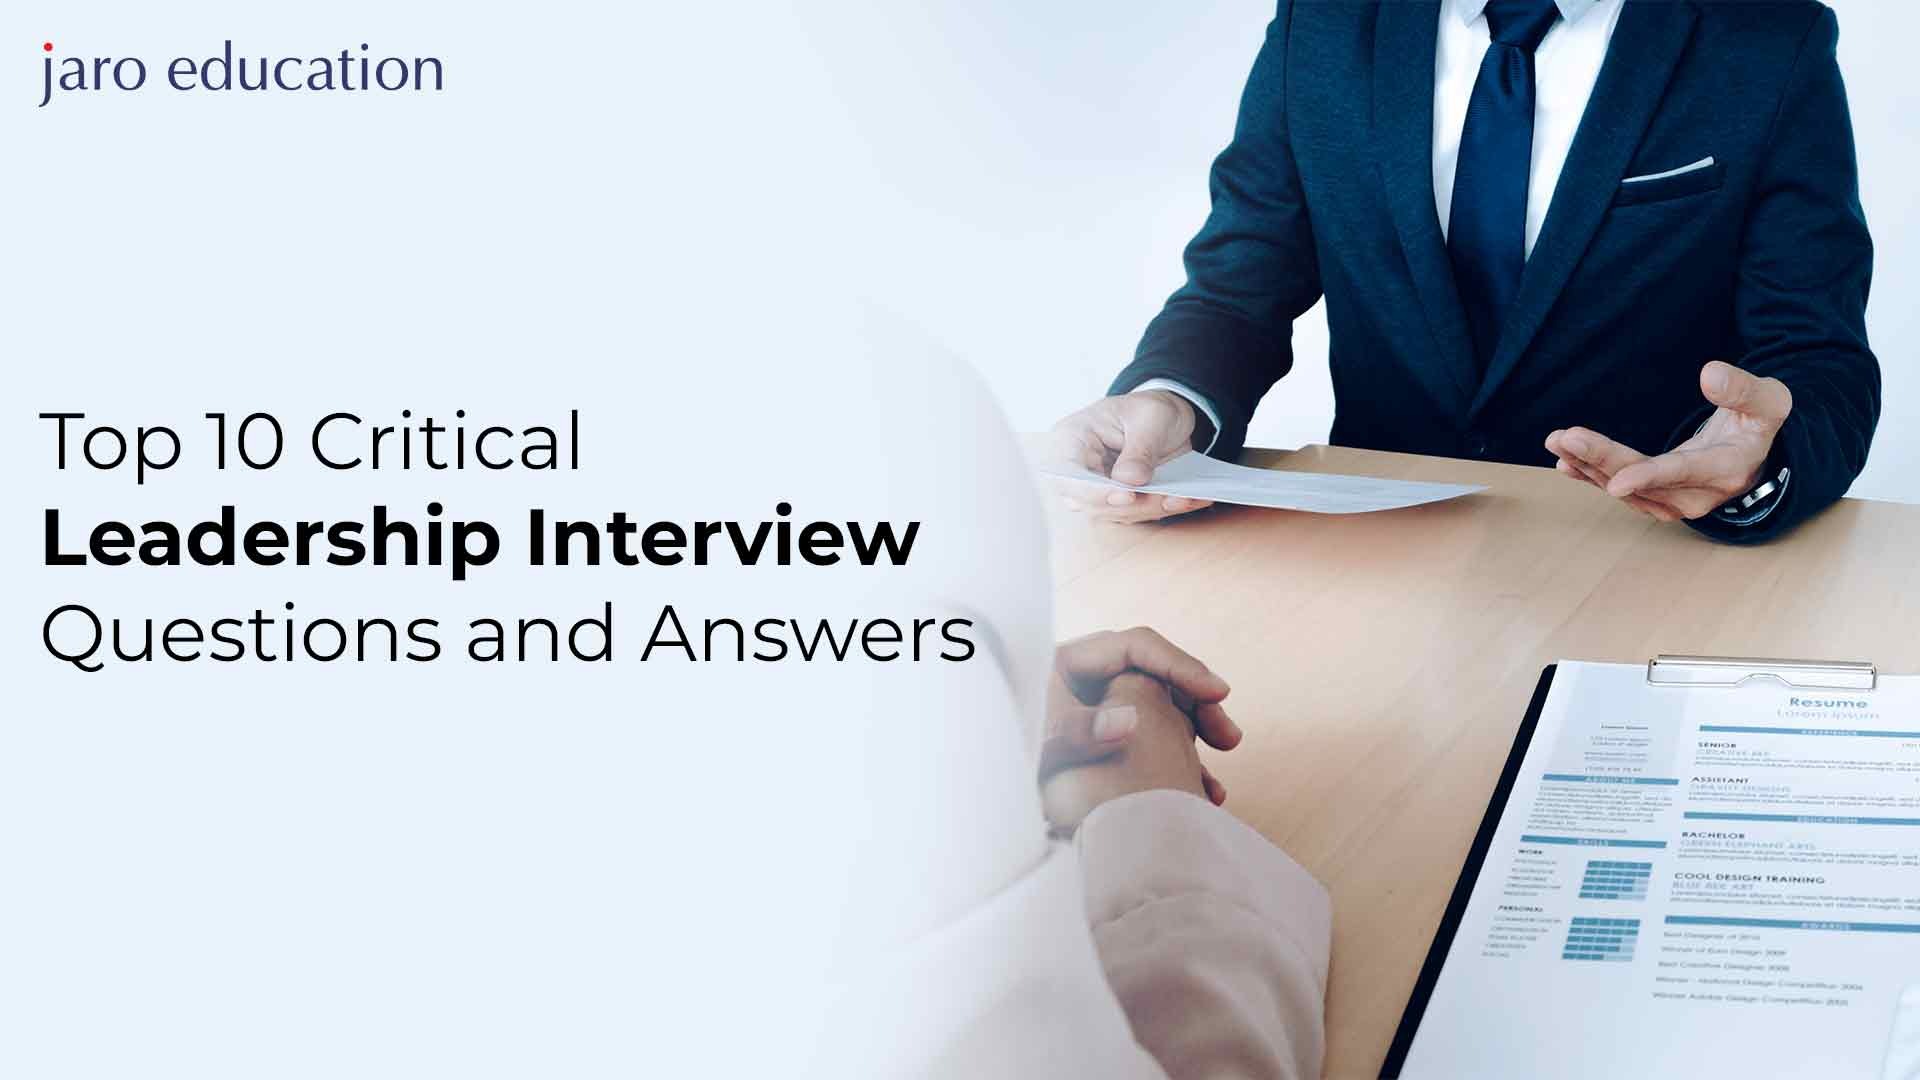 Top-10-Critical-Leadership-Interview-Questions-and-Answers_45_11zon jaro